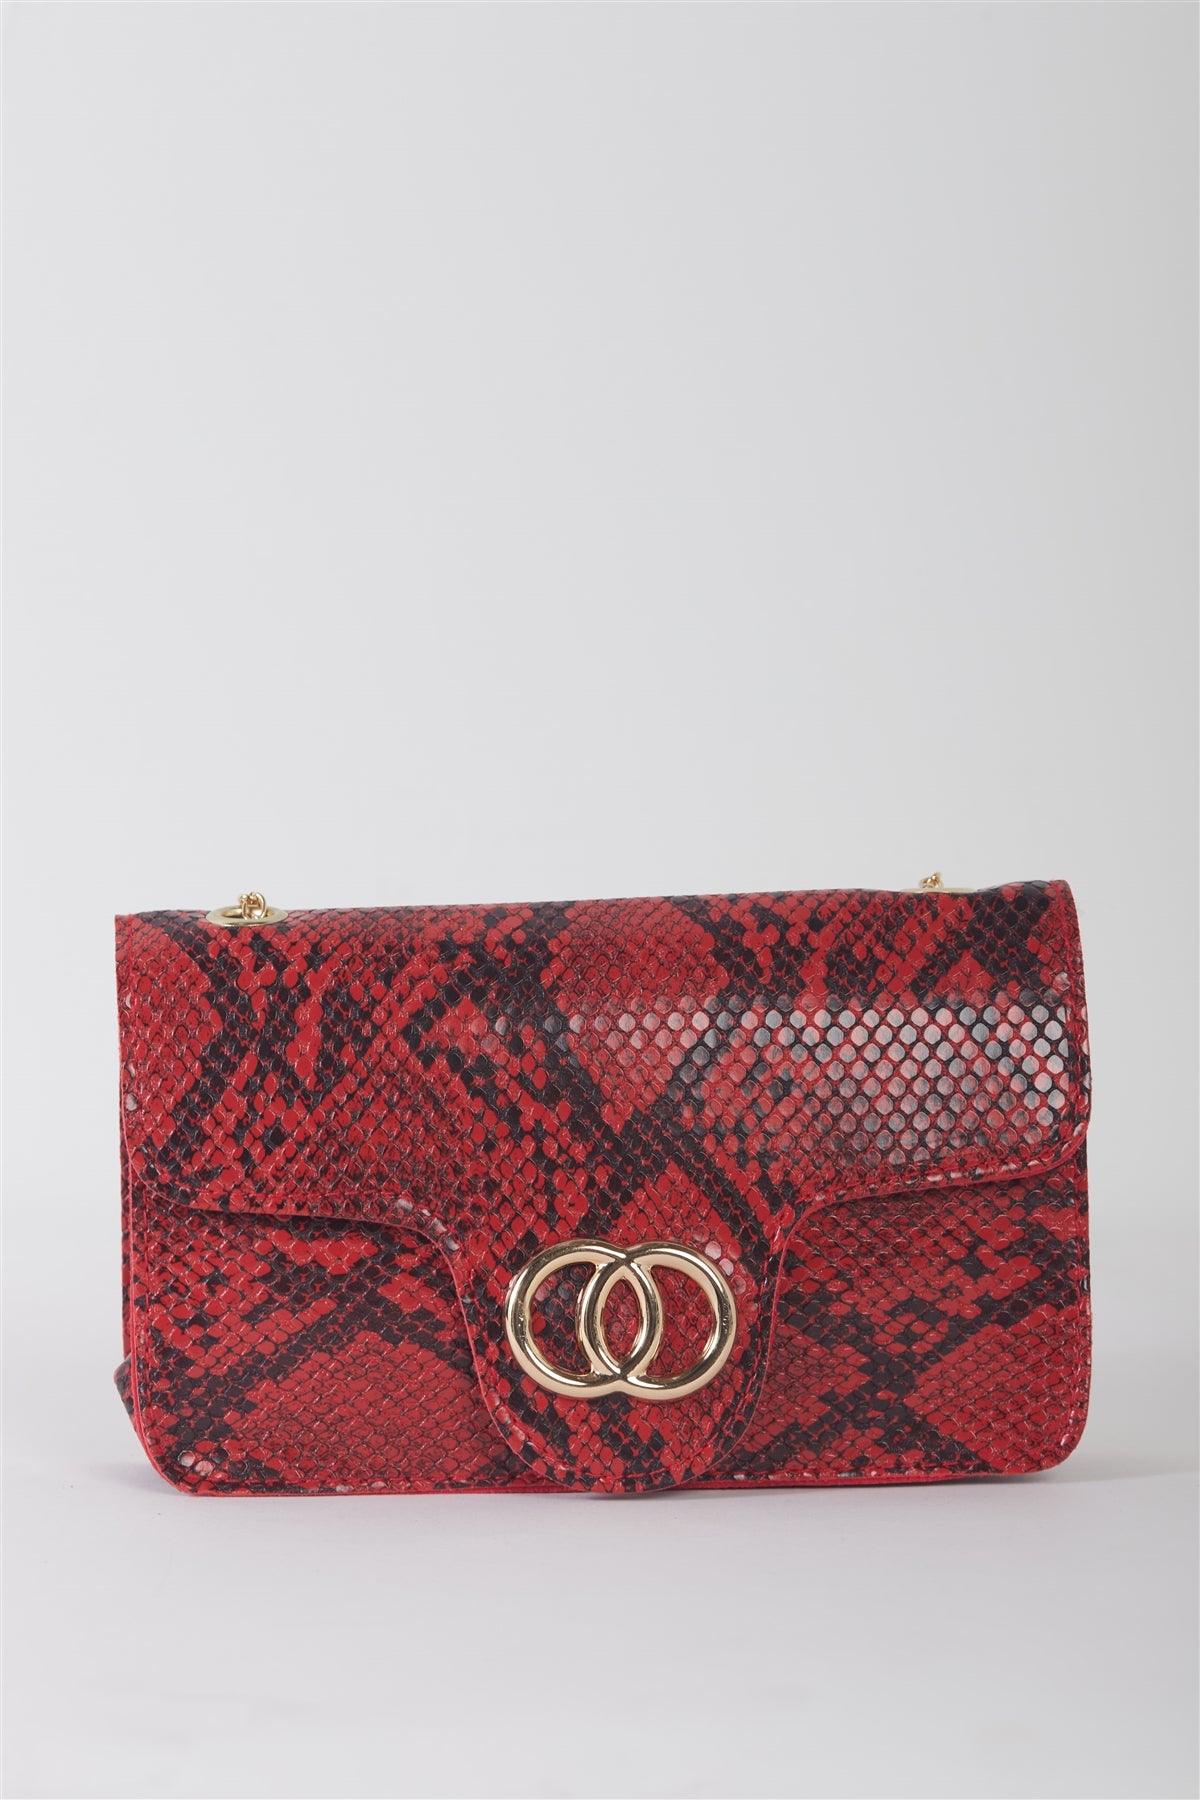 Red Faux Snake Leather Metal Rings Gold Chain Crossbody Bag /3 Bags